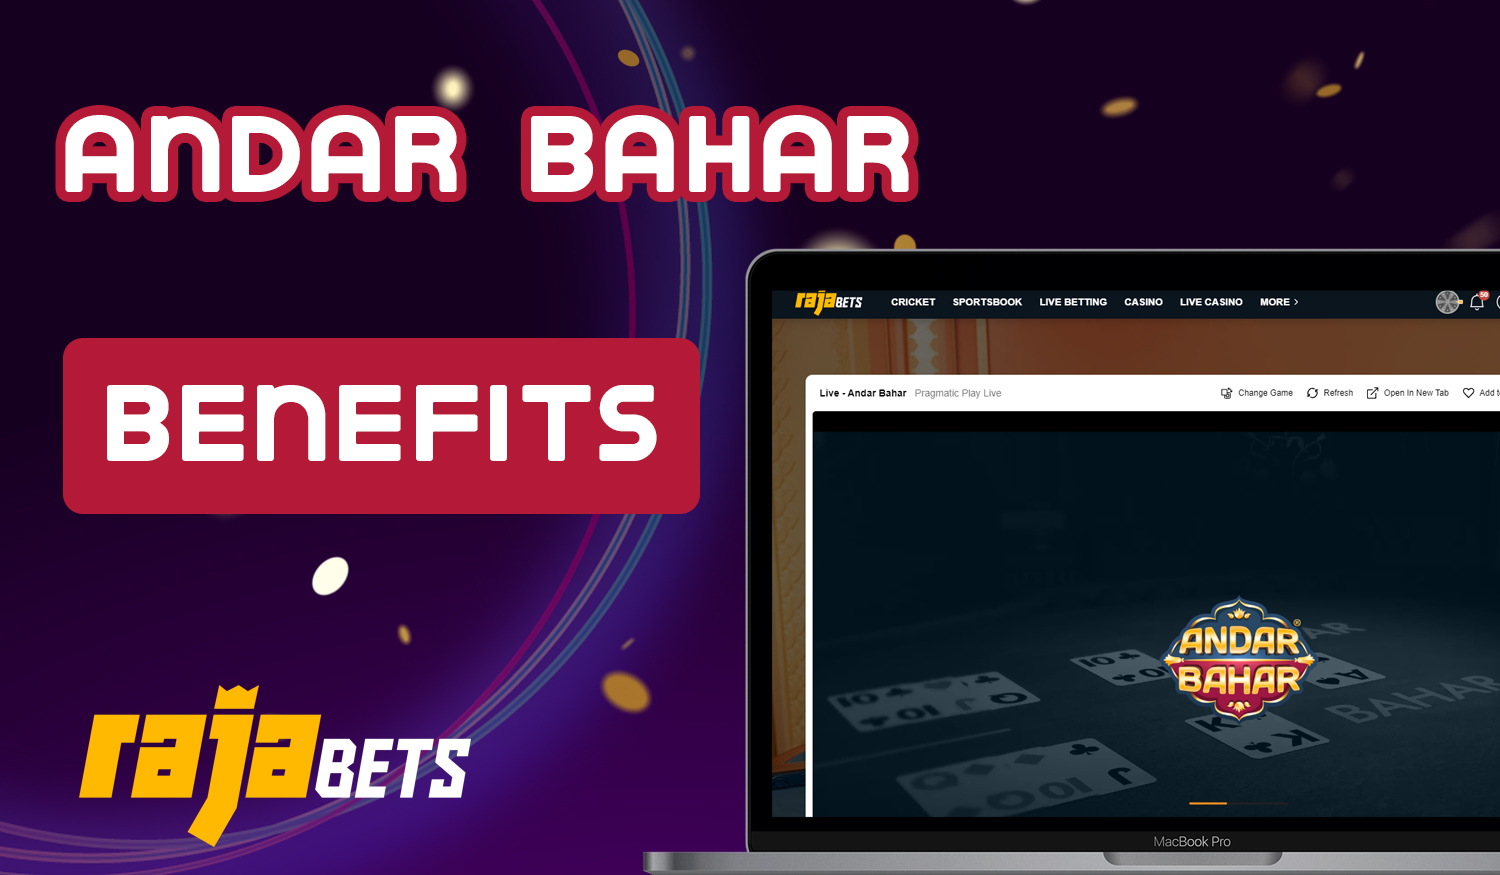 Why fans of the Andar Bahar game from India should choose Rajabets